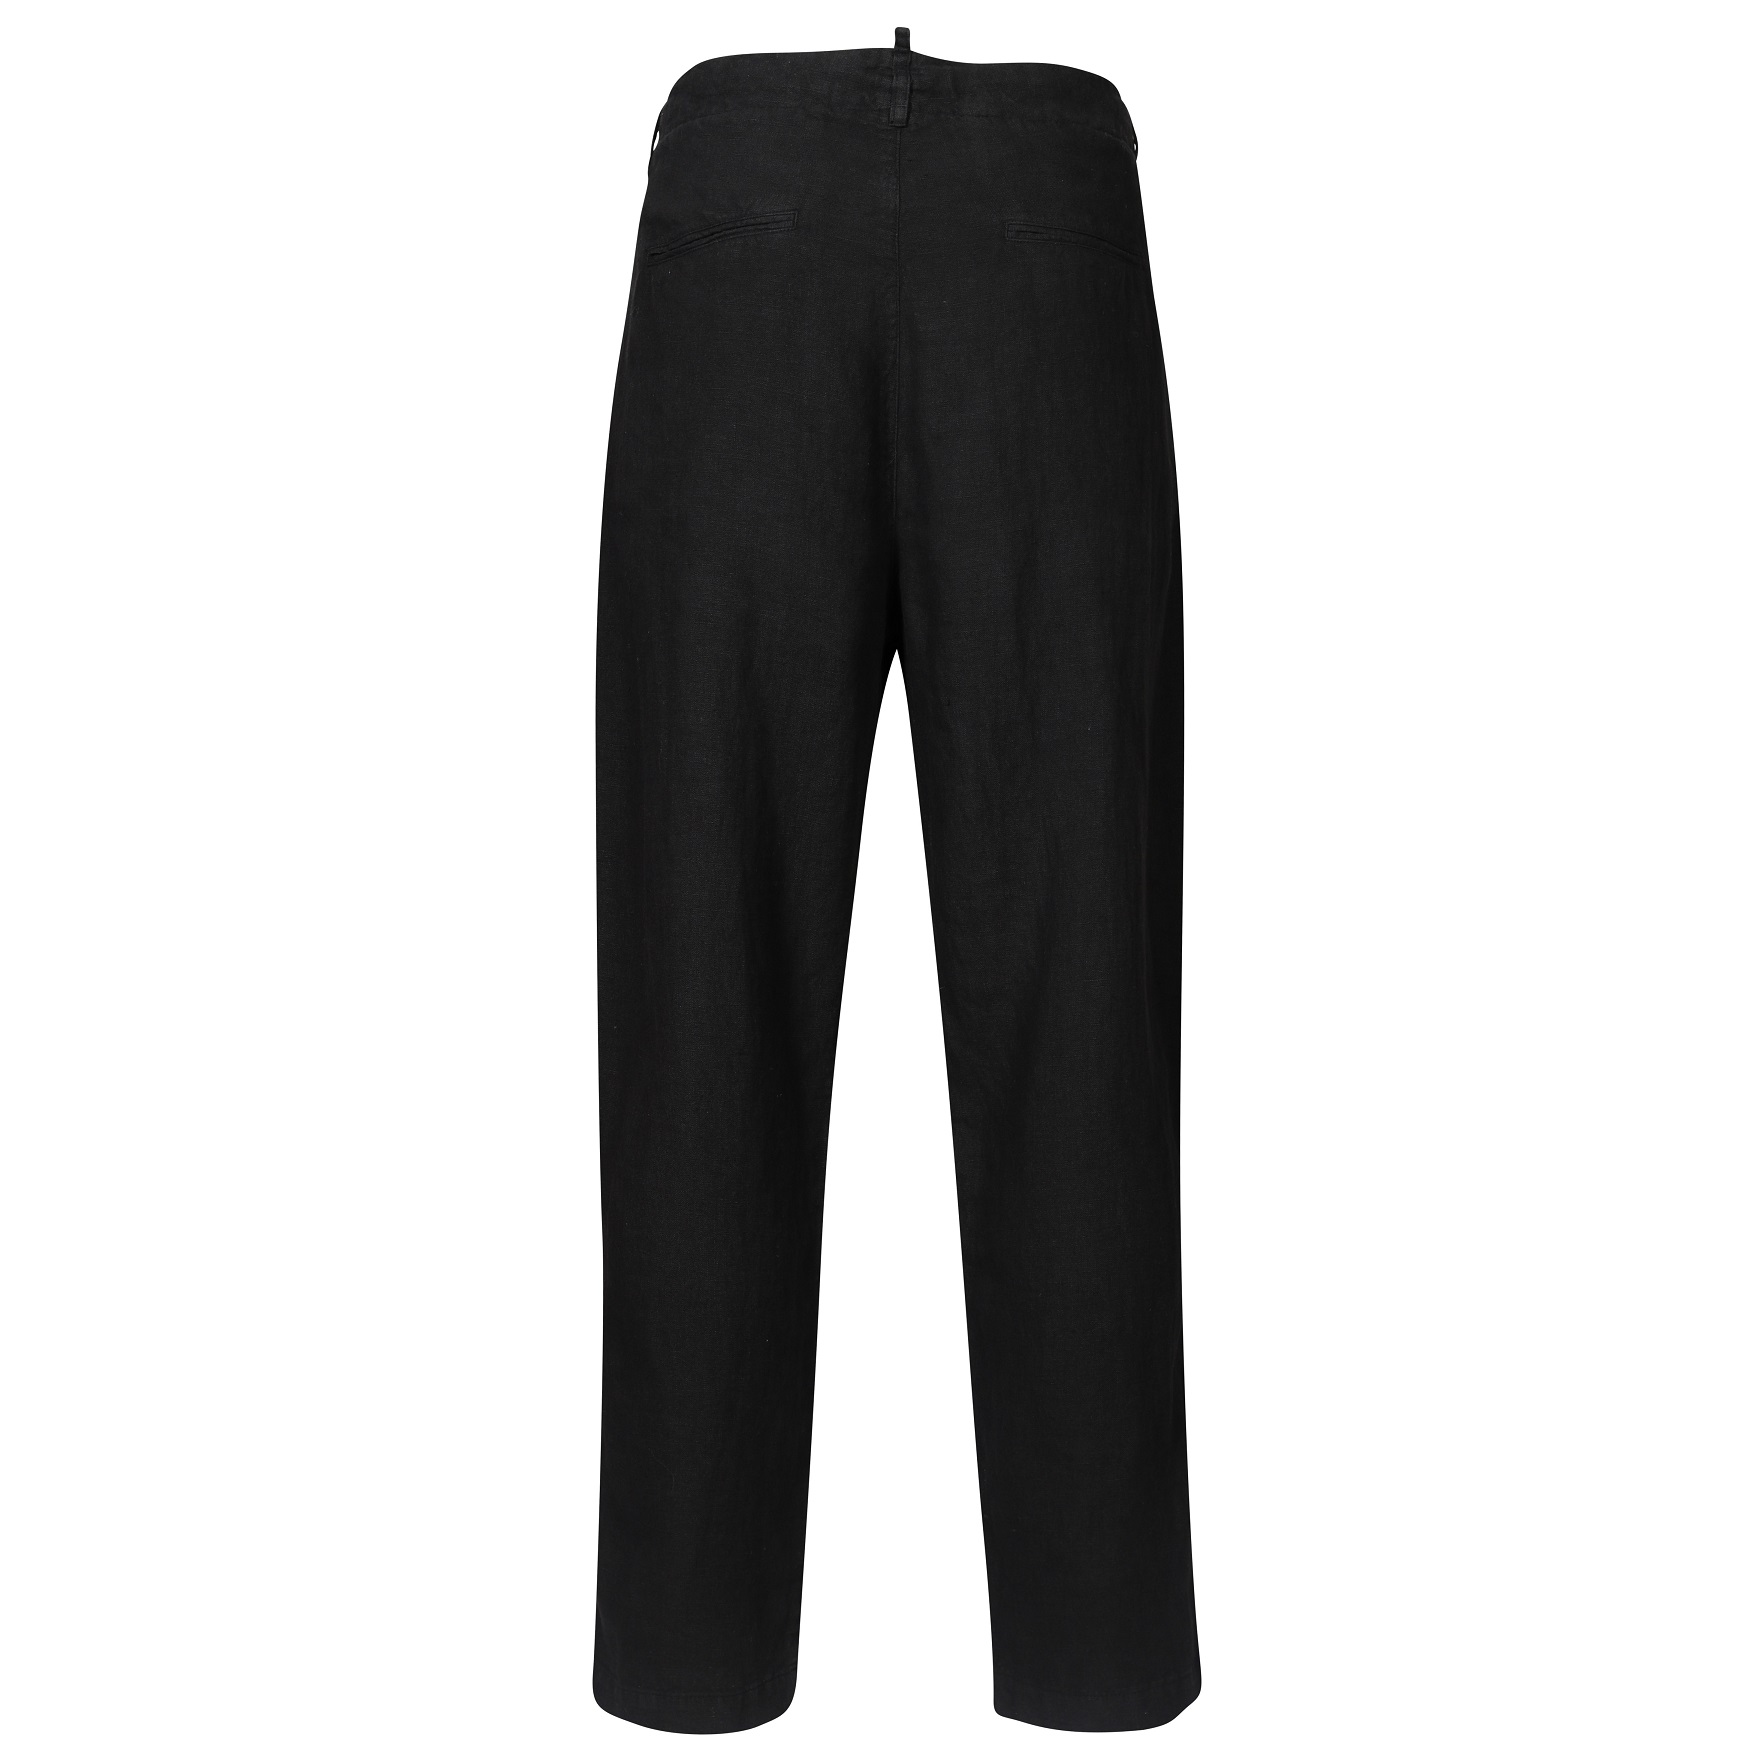 HANNES ROETHER Linen Trouser in Black M